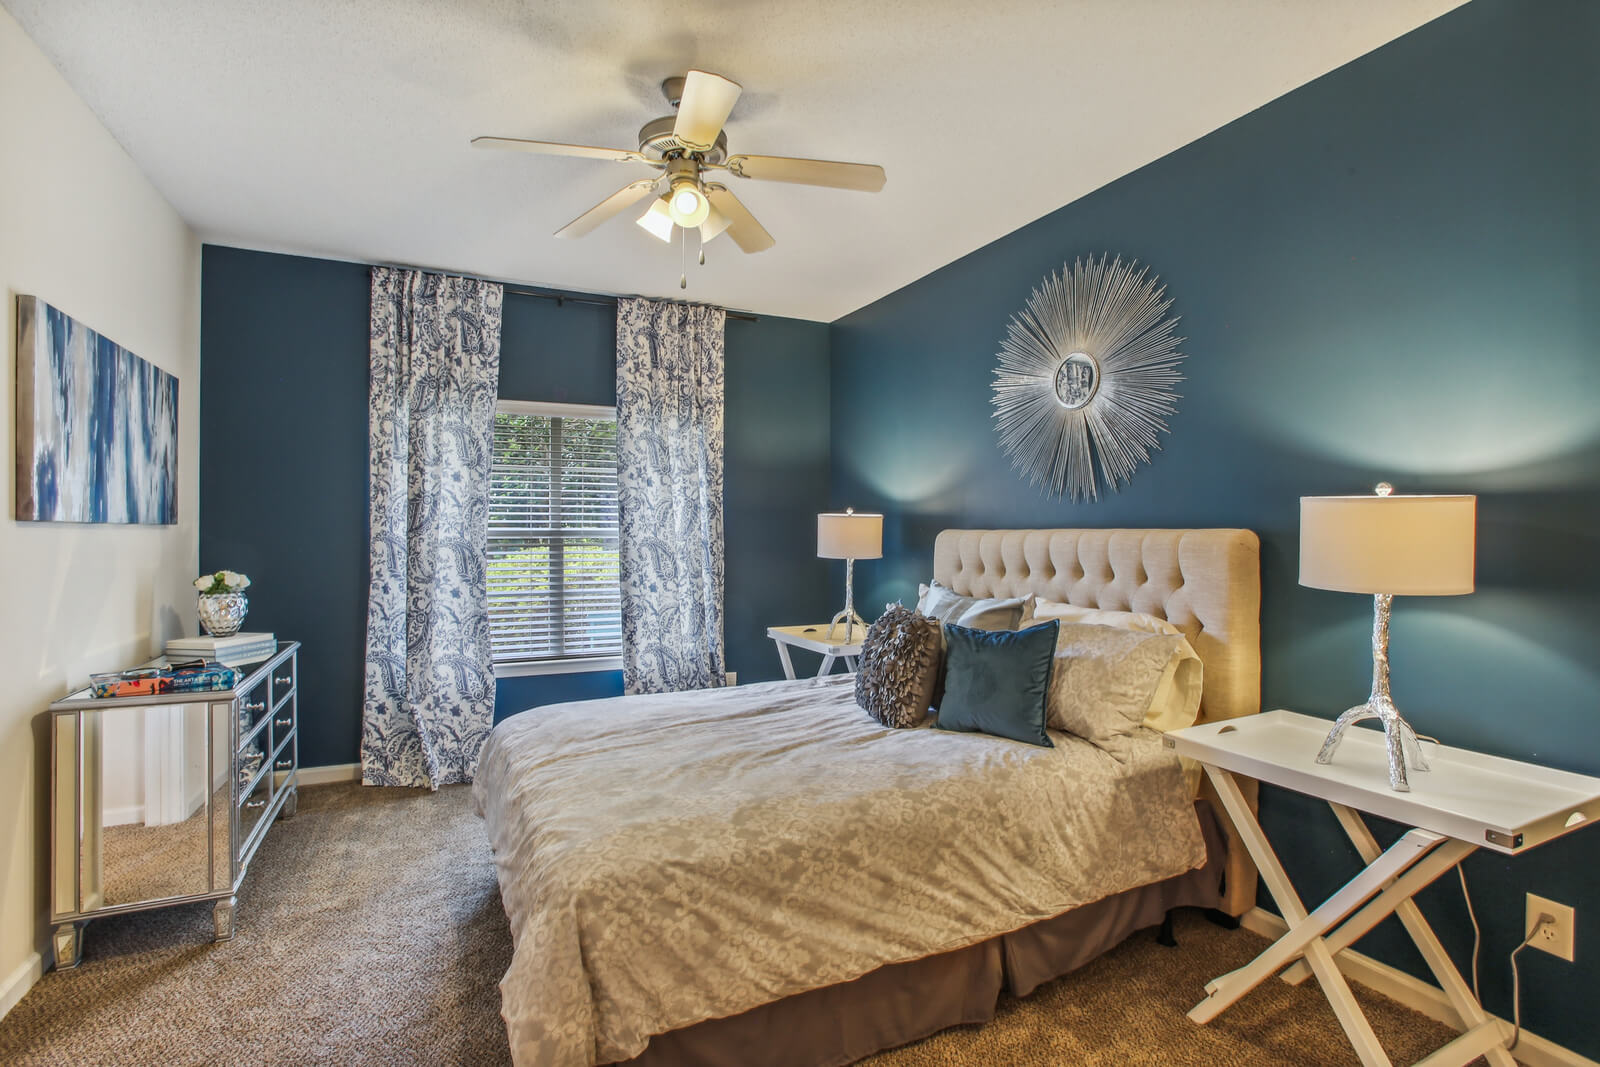 model carpeted bedroom with ceiling fan and ample lighting